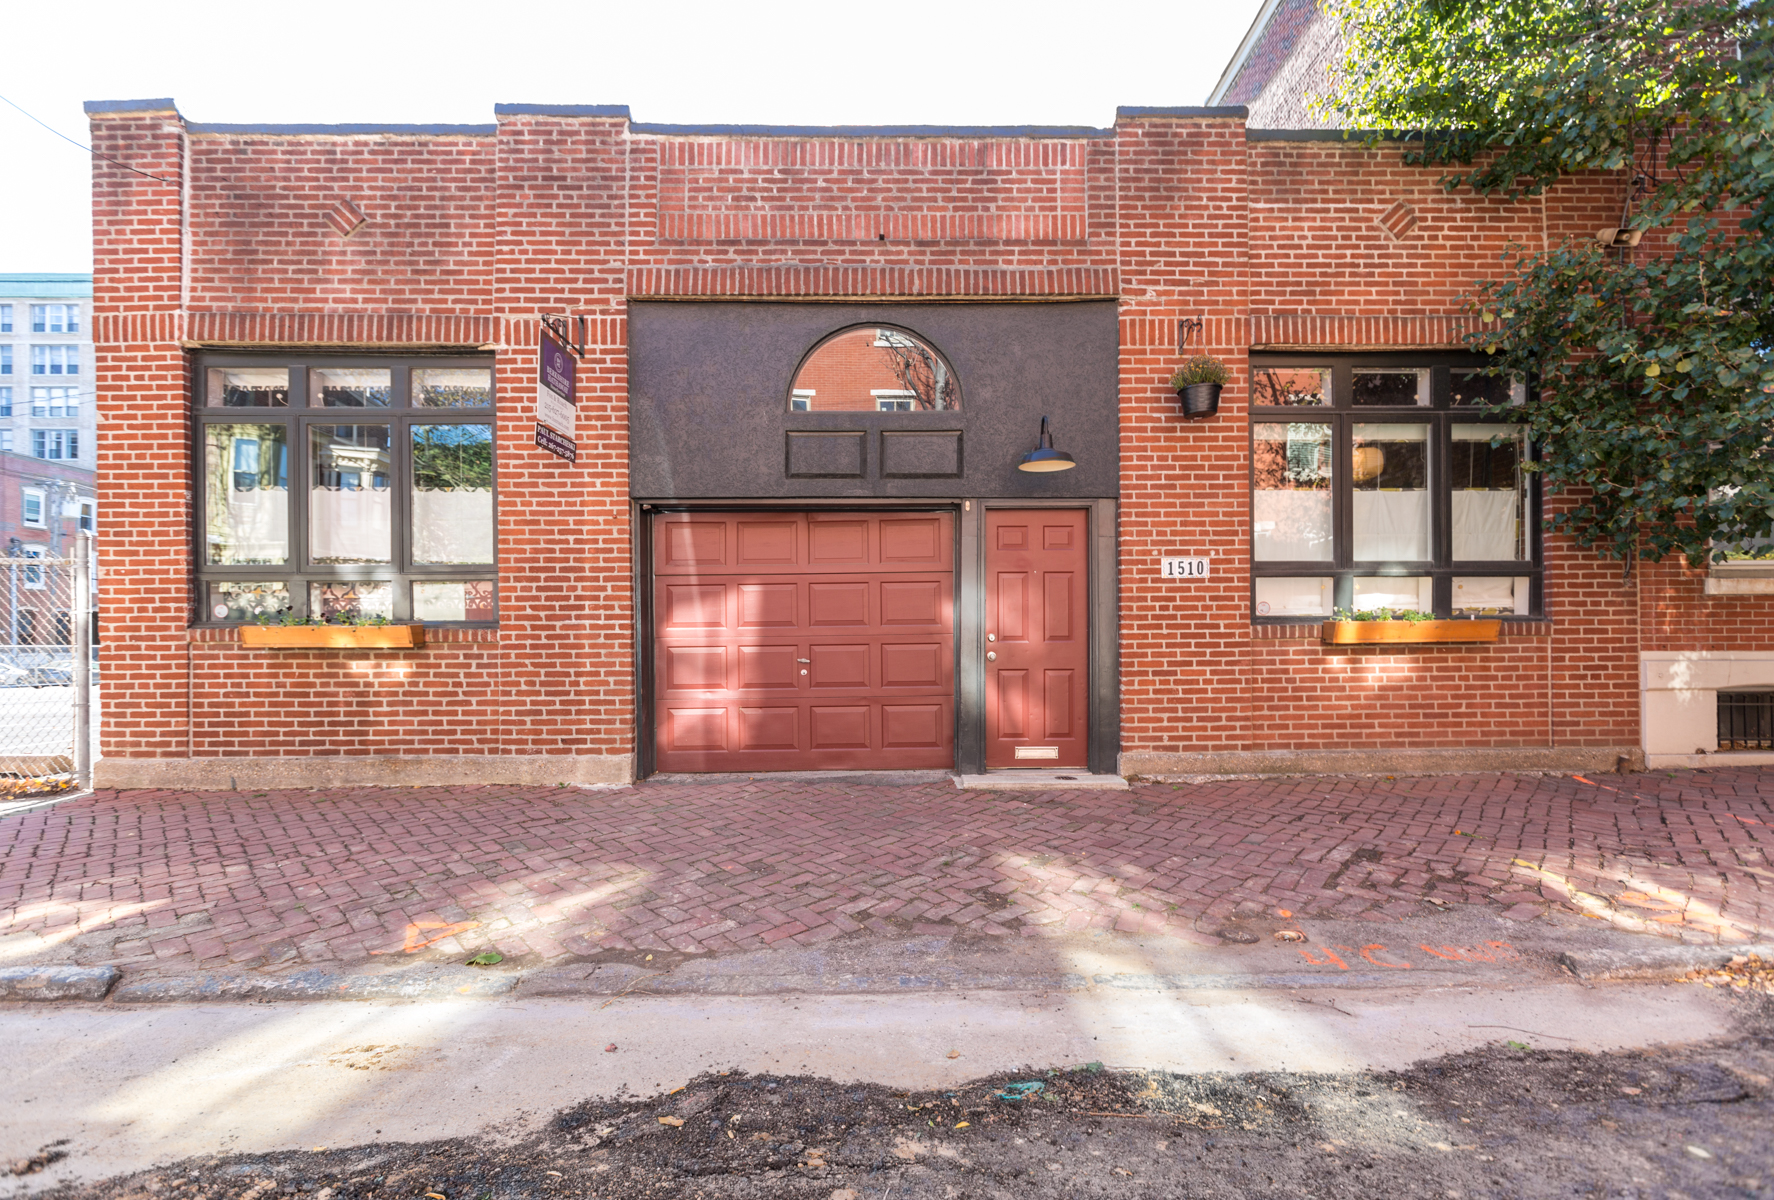 A one-story brick property with a red garage door in the center sandwiched by two windows.